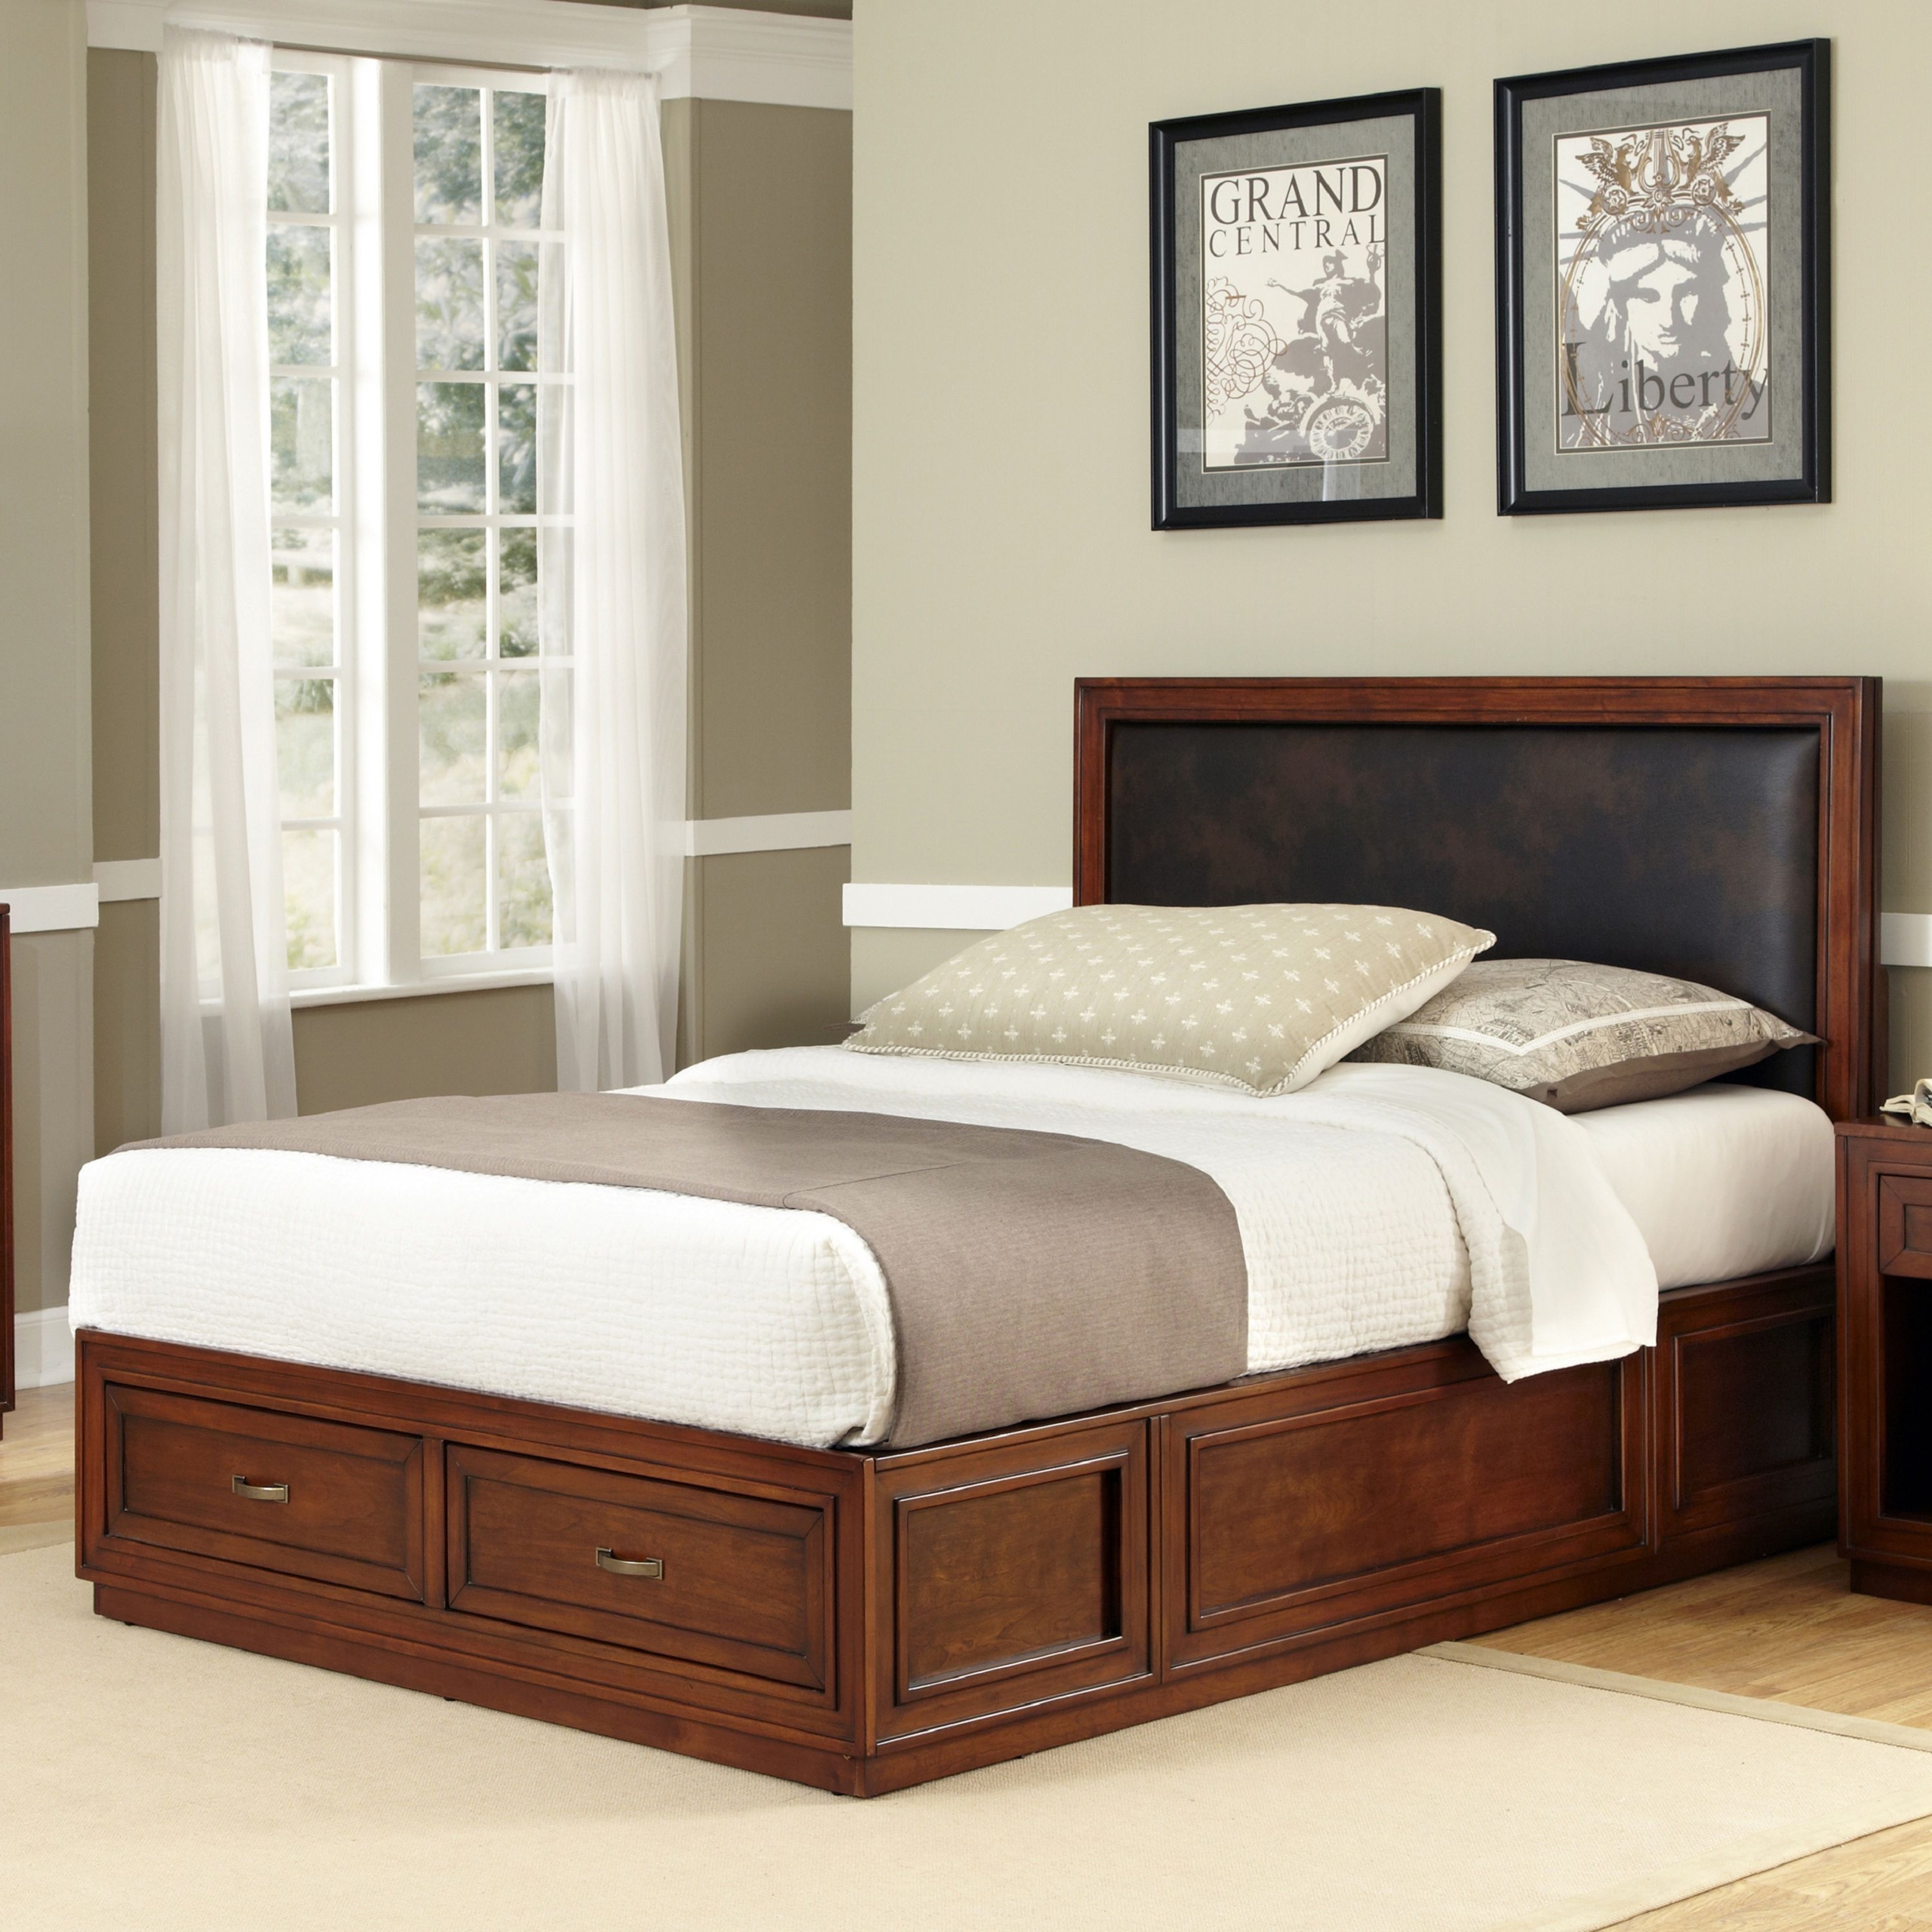 Twin leather platform bed